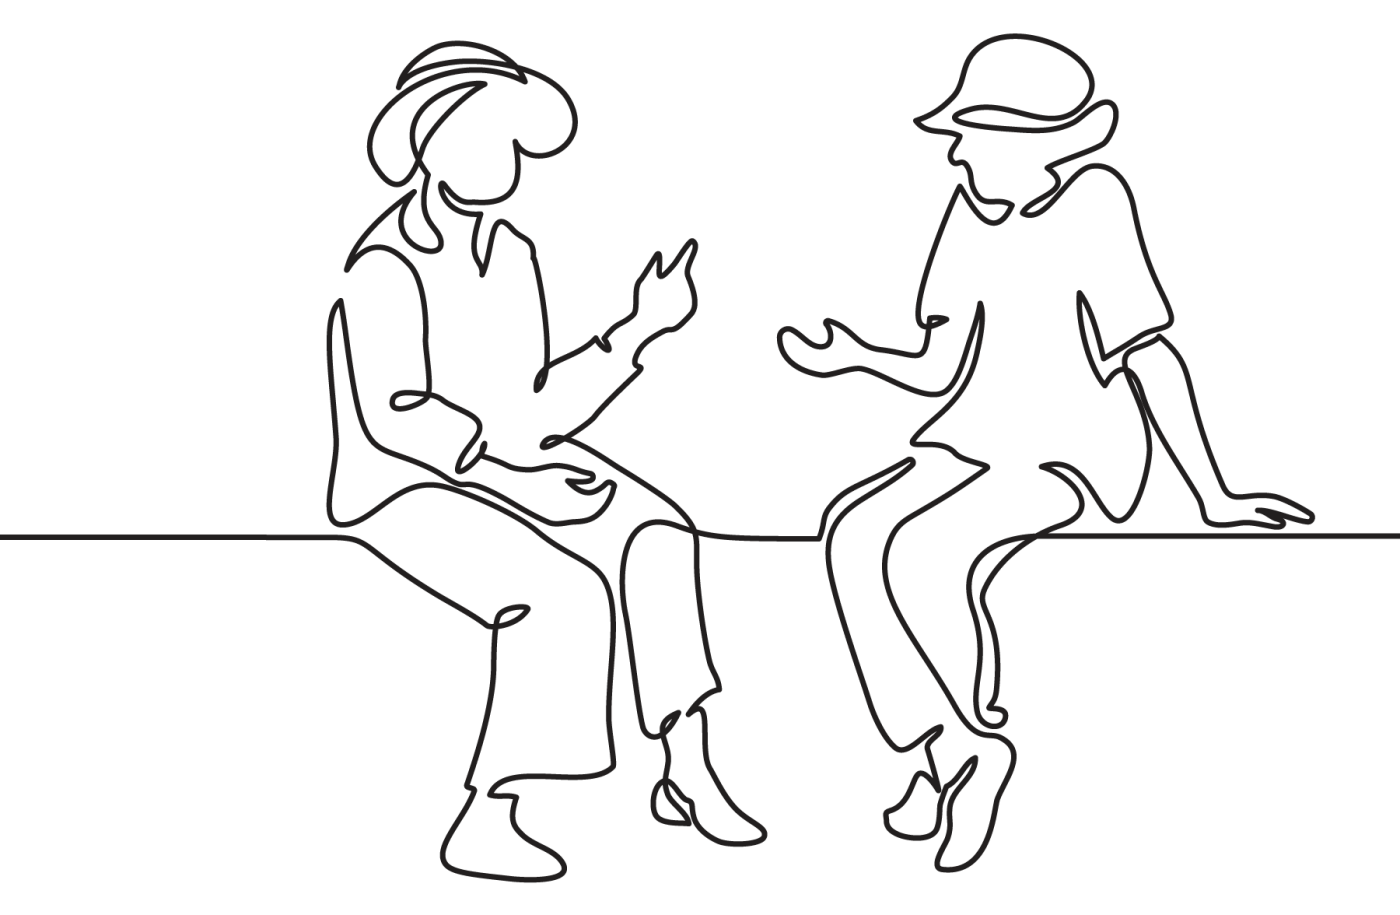 Line drawing of two people seated and talking